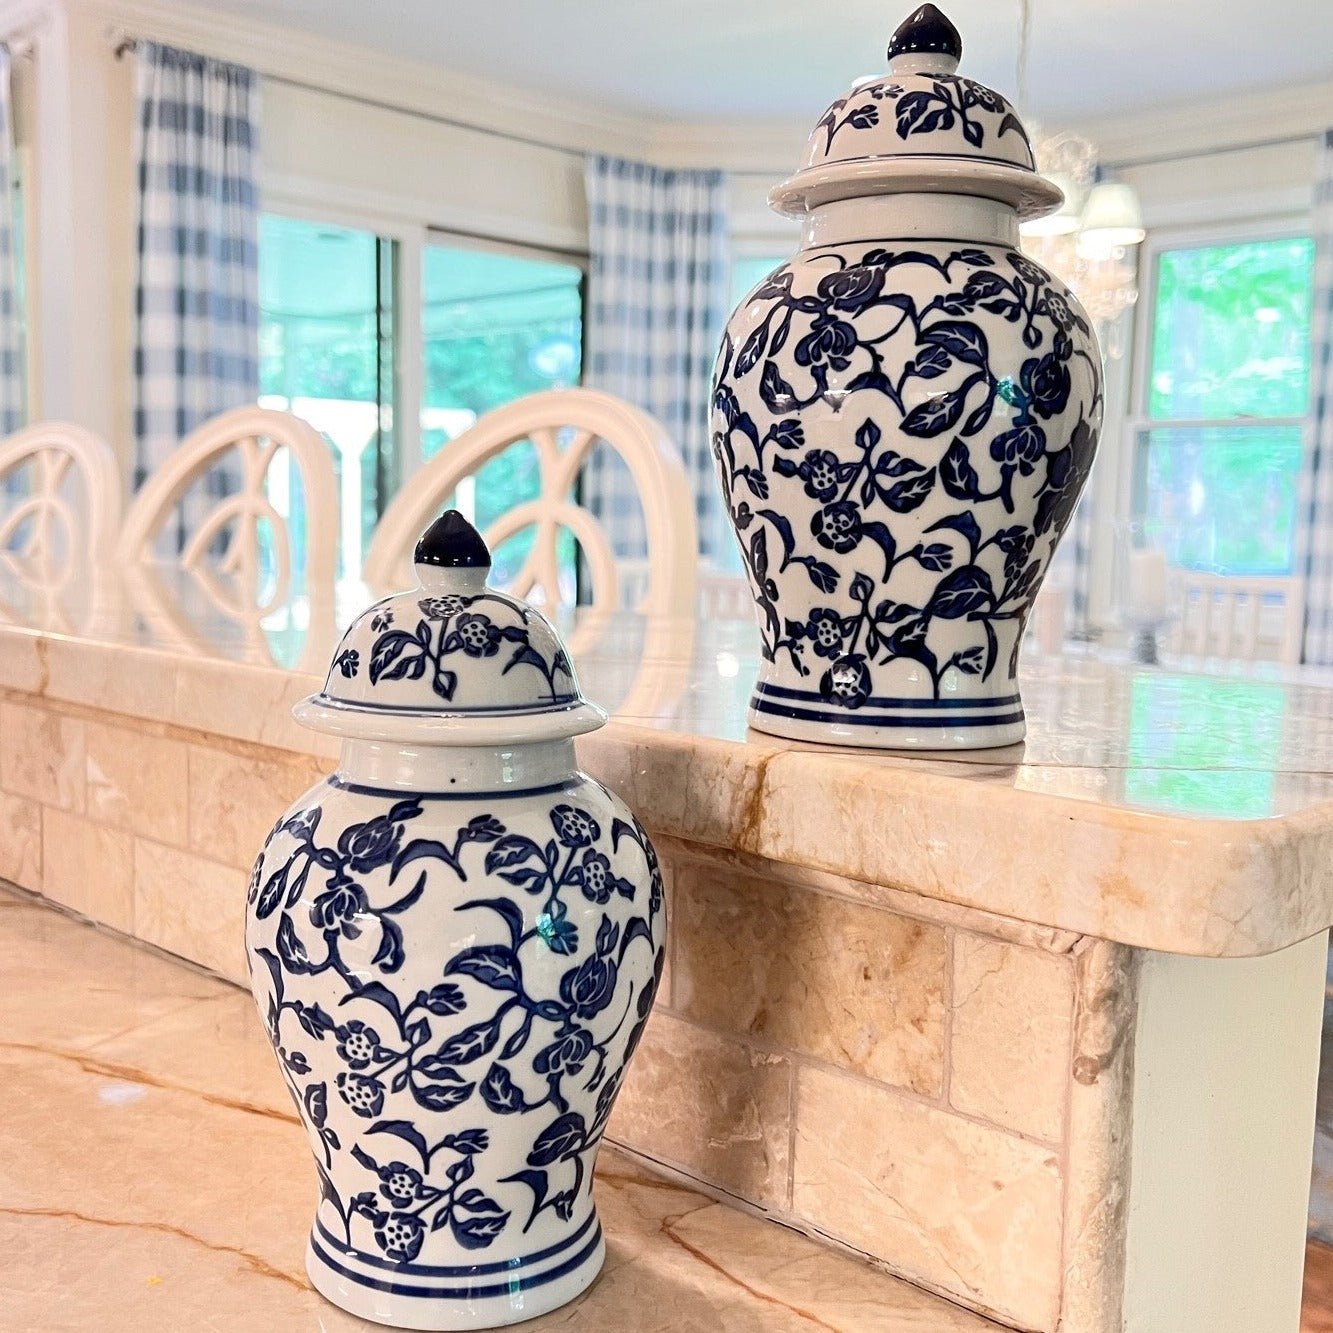 How to Decorate with Blue and White Porcelain Ginger Jars